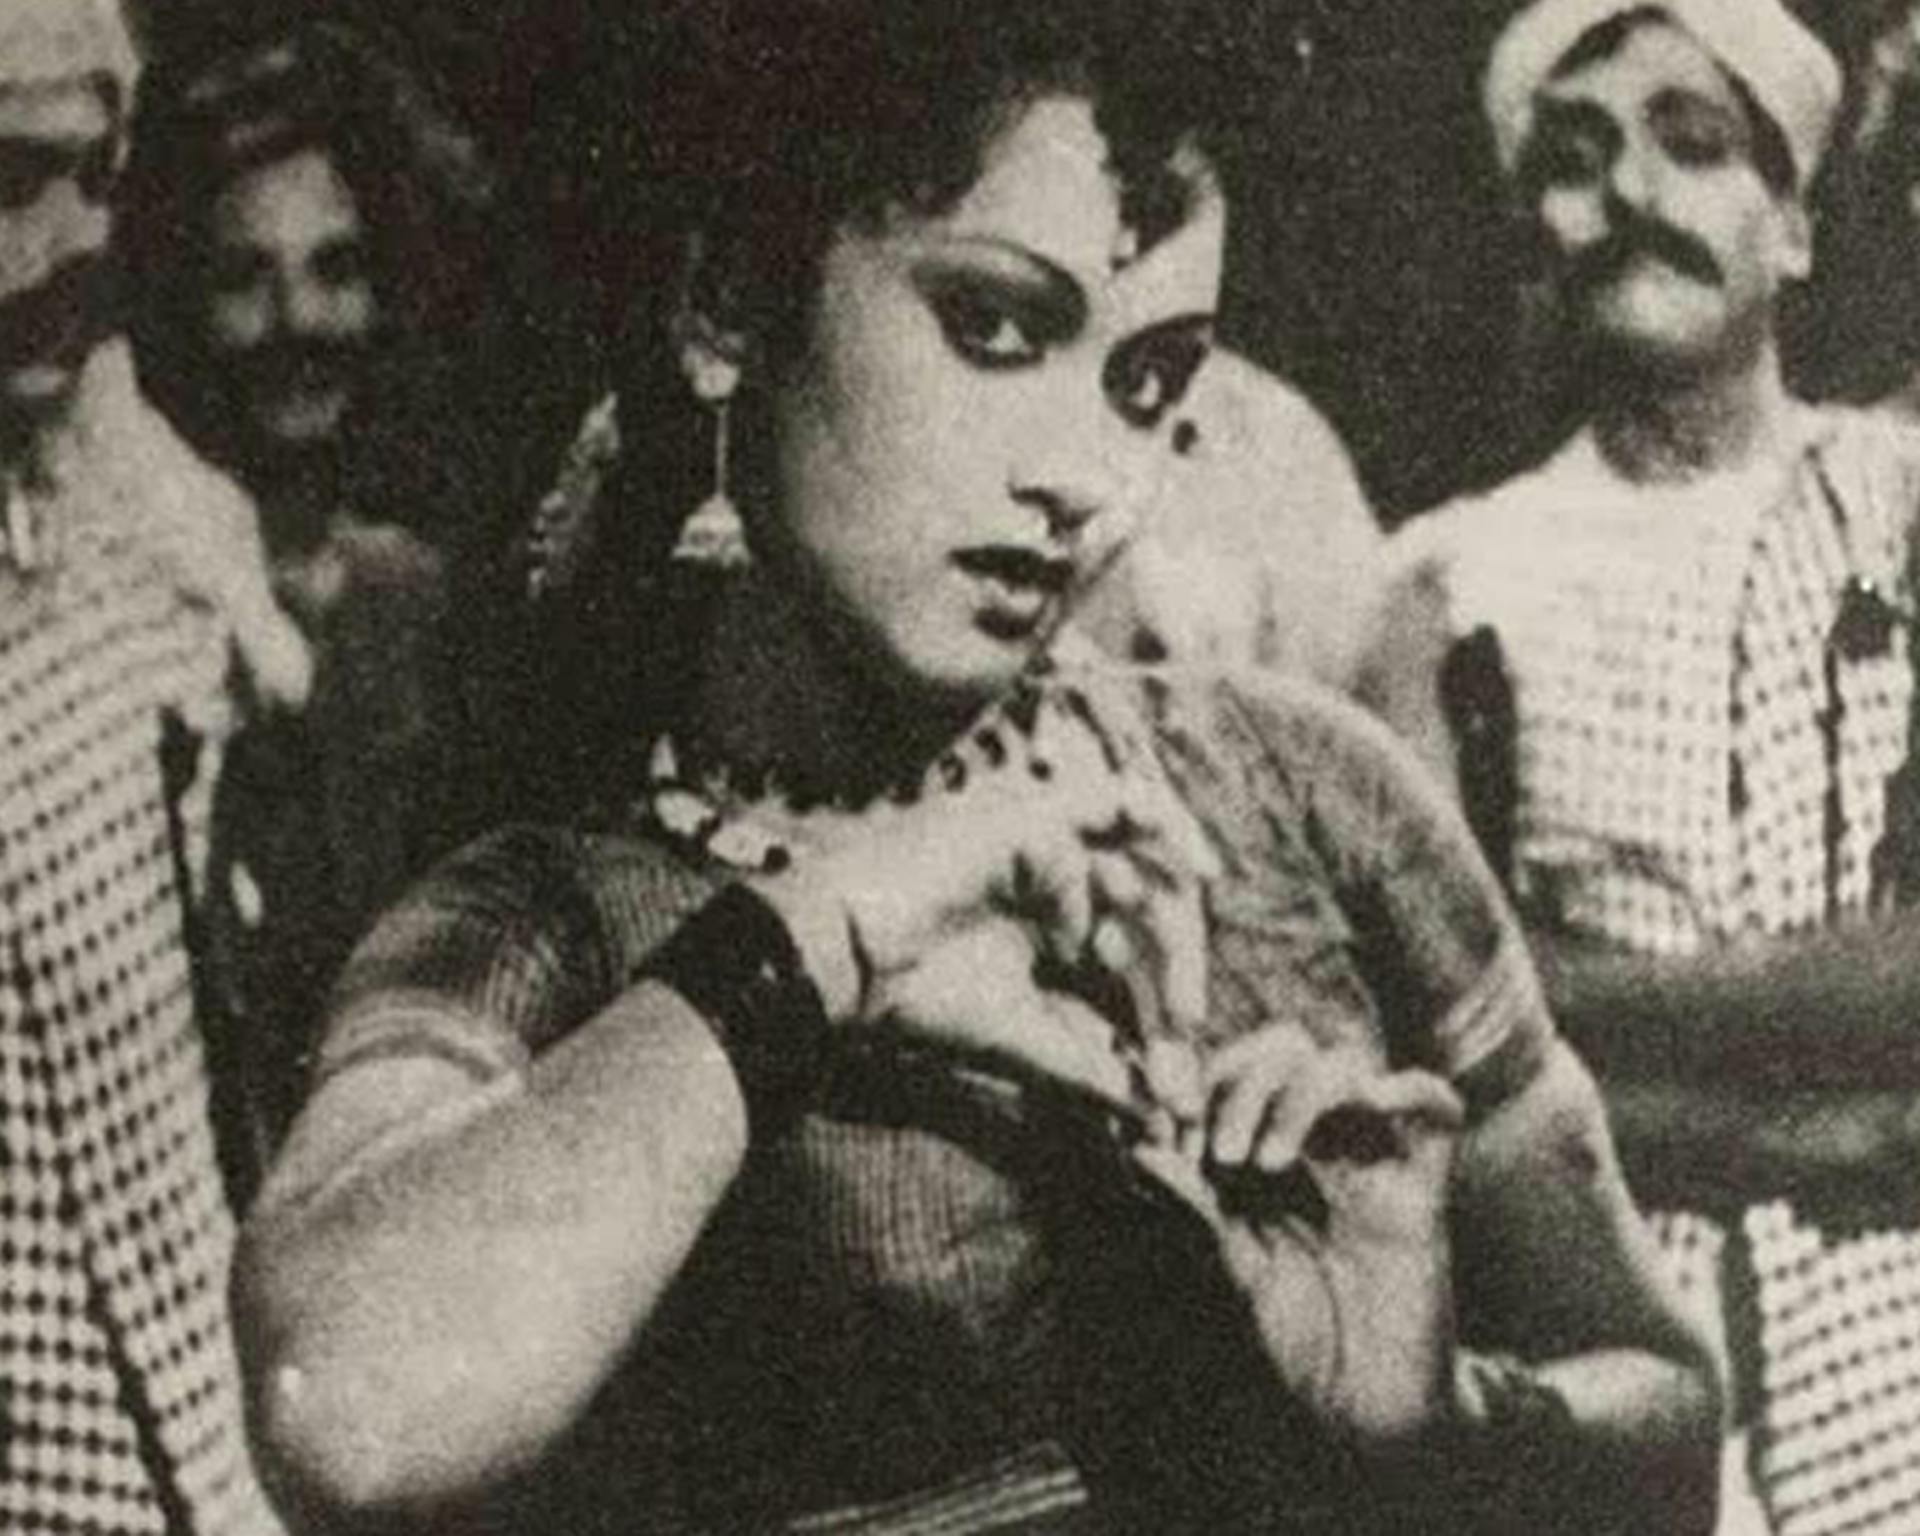 Actress Harini, originally from Udupi, was already a popular theatre actor in Madras when she starred in Jaganmohini (1951) at the age of 14. Courtesy: From K. Puttaswamy's 'Kannada Talkies'